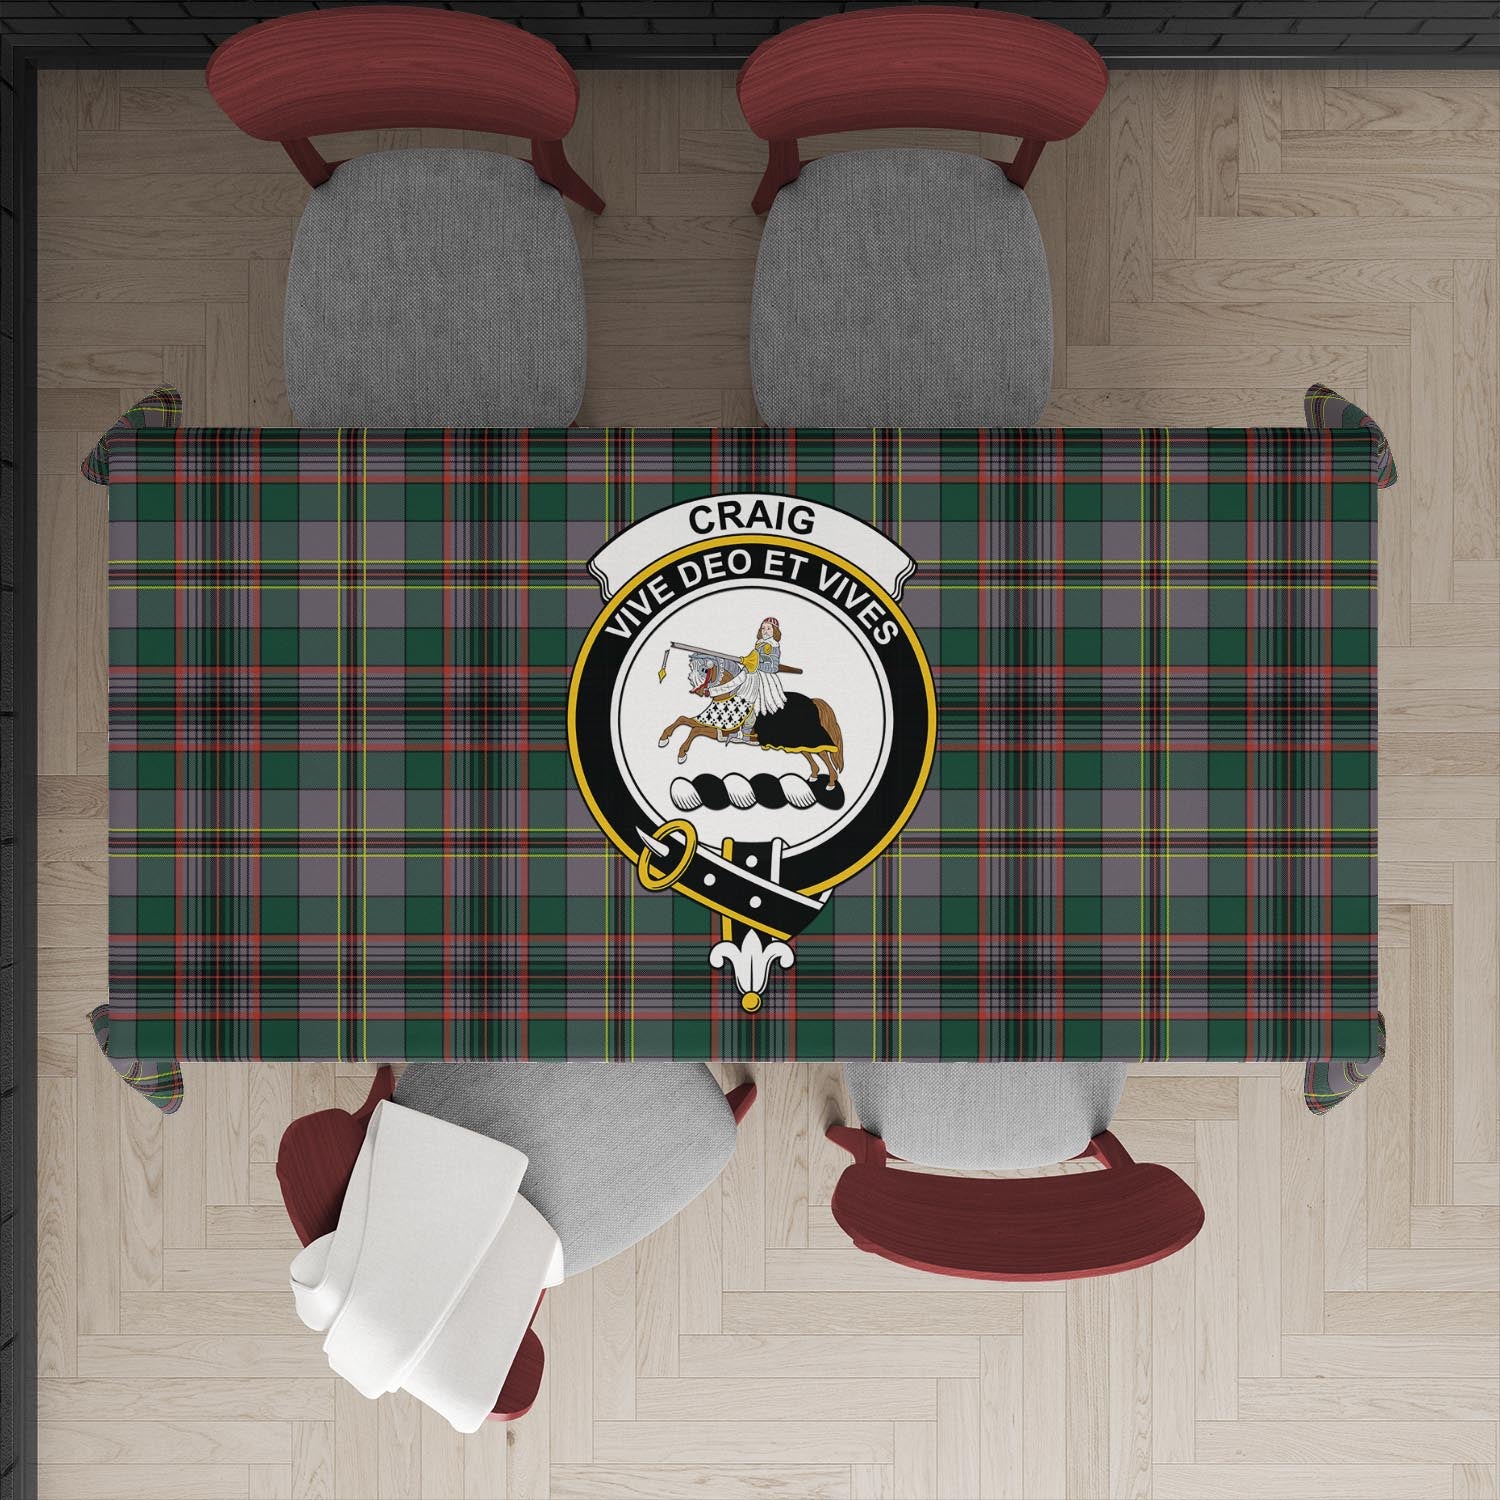 craig-ancient-tatan-tablecloth-with-family-crest